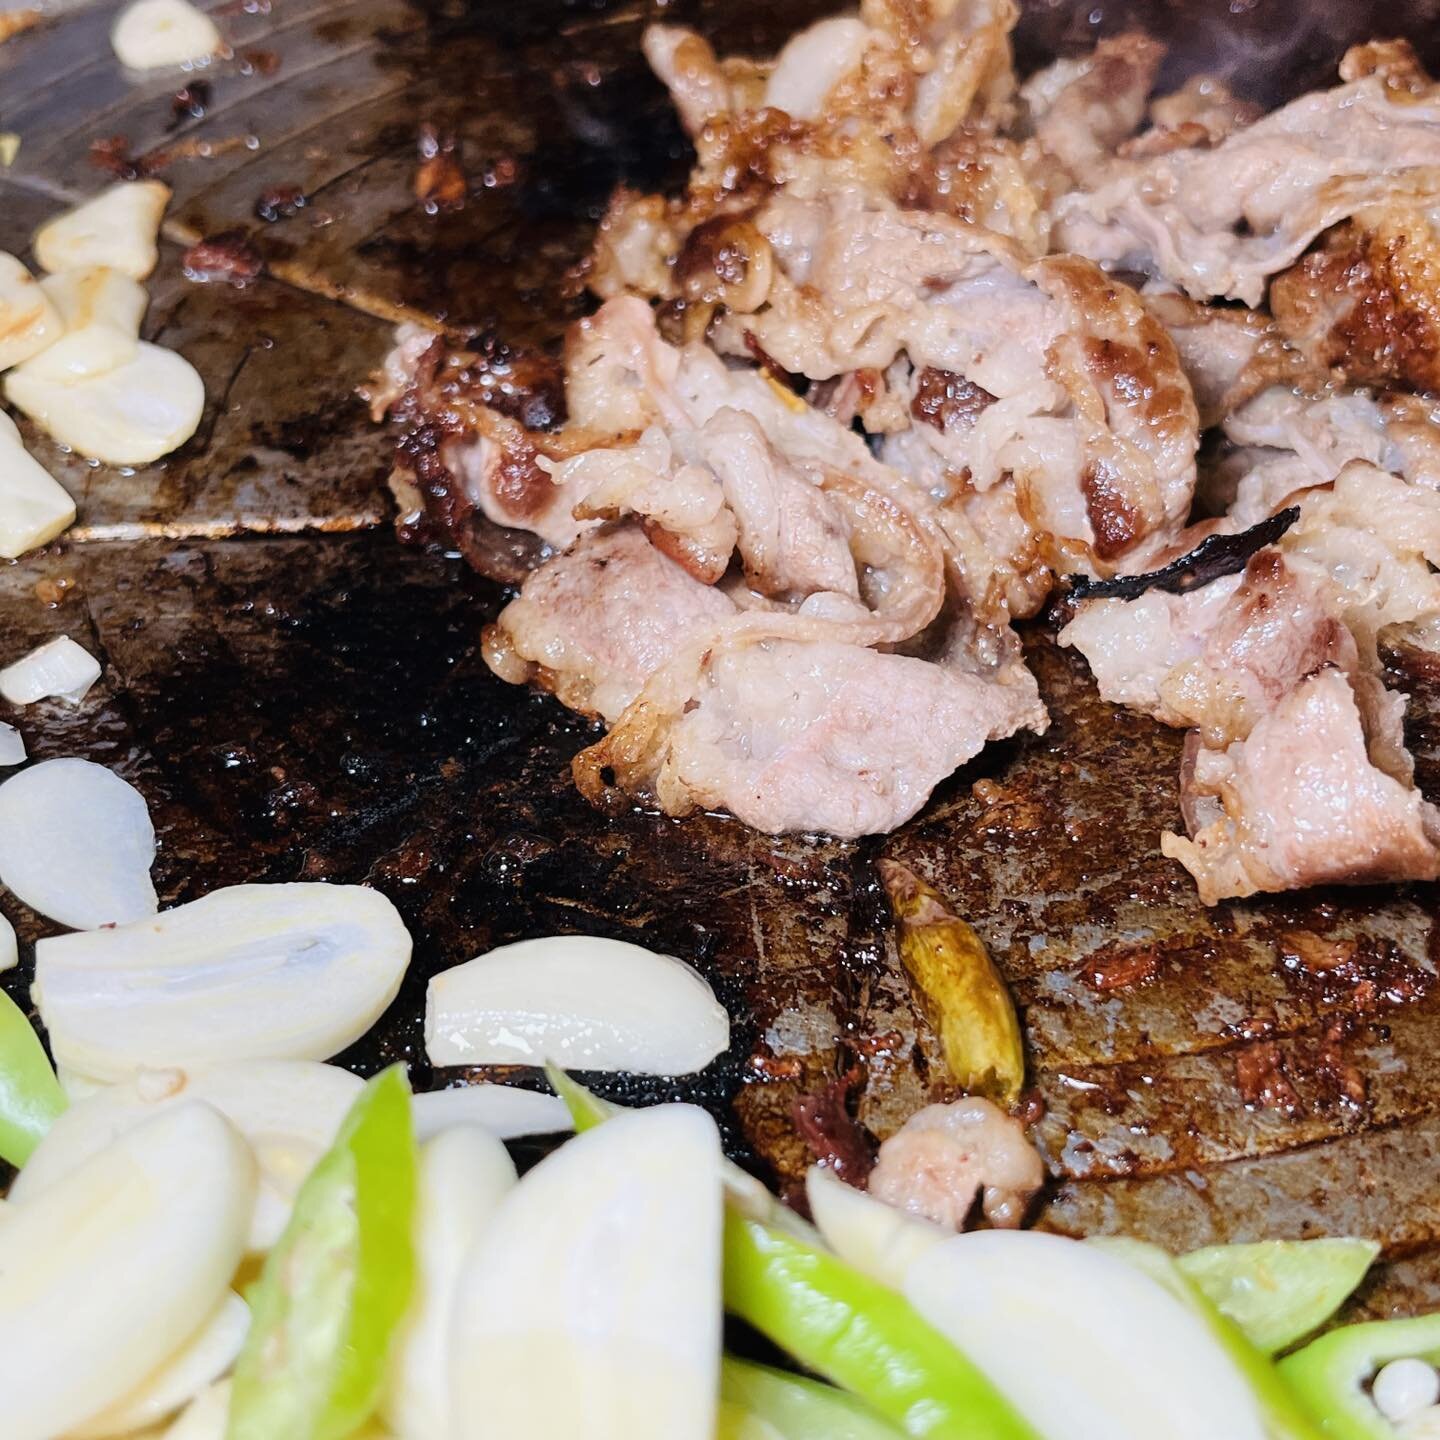 BUFFET-STYLE KOREAN BARBECUE IN BAGUIO CITY!

Korean Palace is a popular Korean barbecue spot in Baguio City. What I like about this spot is that its meats and side dishes are served buffet-style. So you don&rsquo;t have to wait for the waiters to br